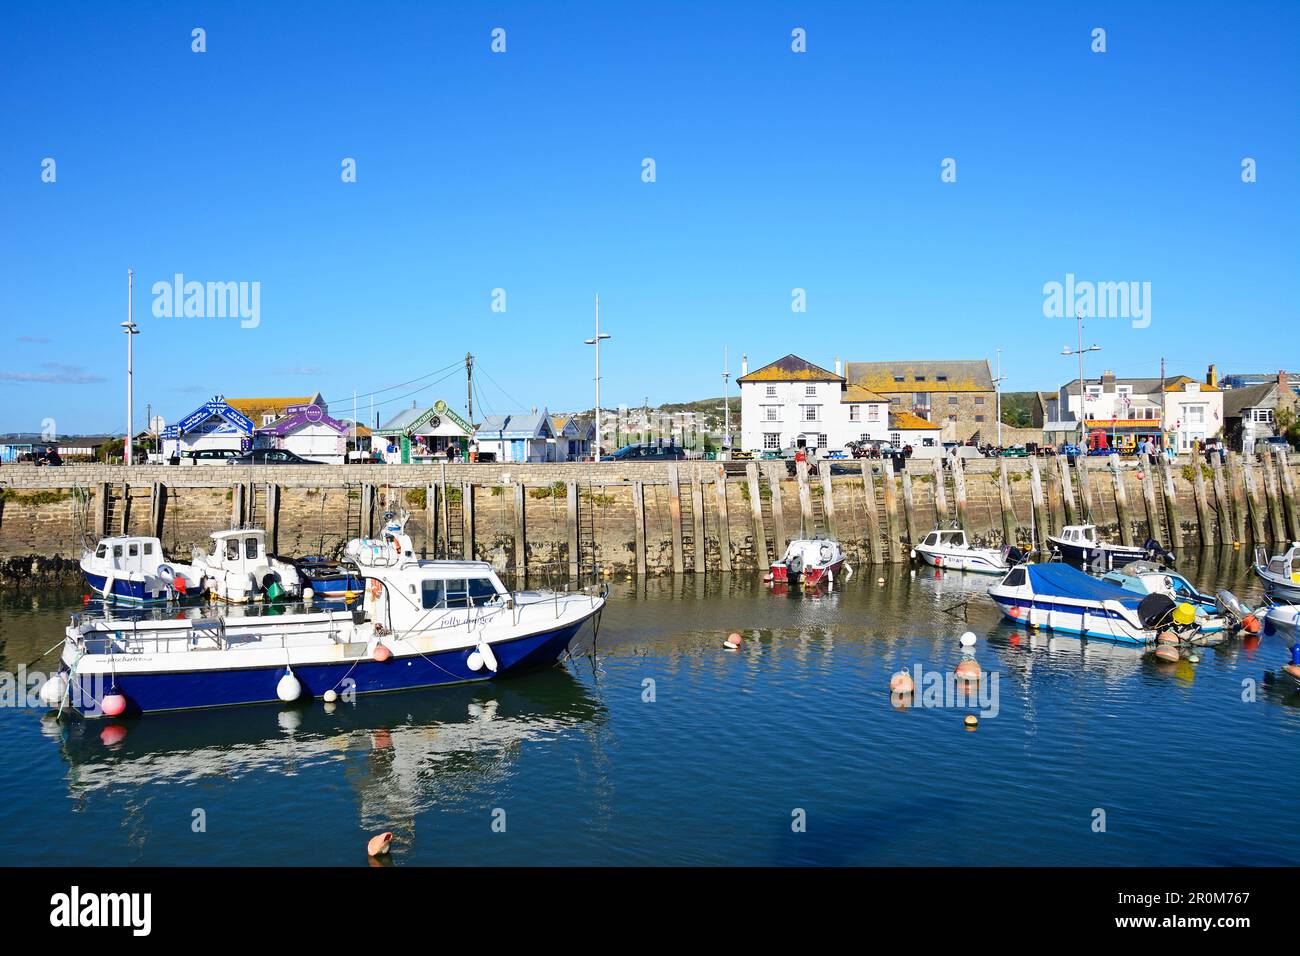 View of traditional fishing boats moored in the harbour at low tide with town buildings to the rear, West Bay, Dorset, UK. Stock Photo